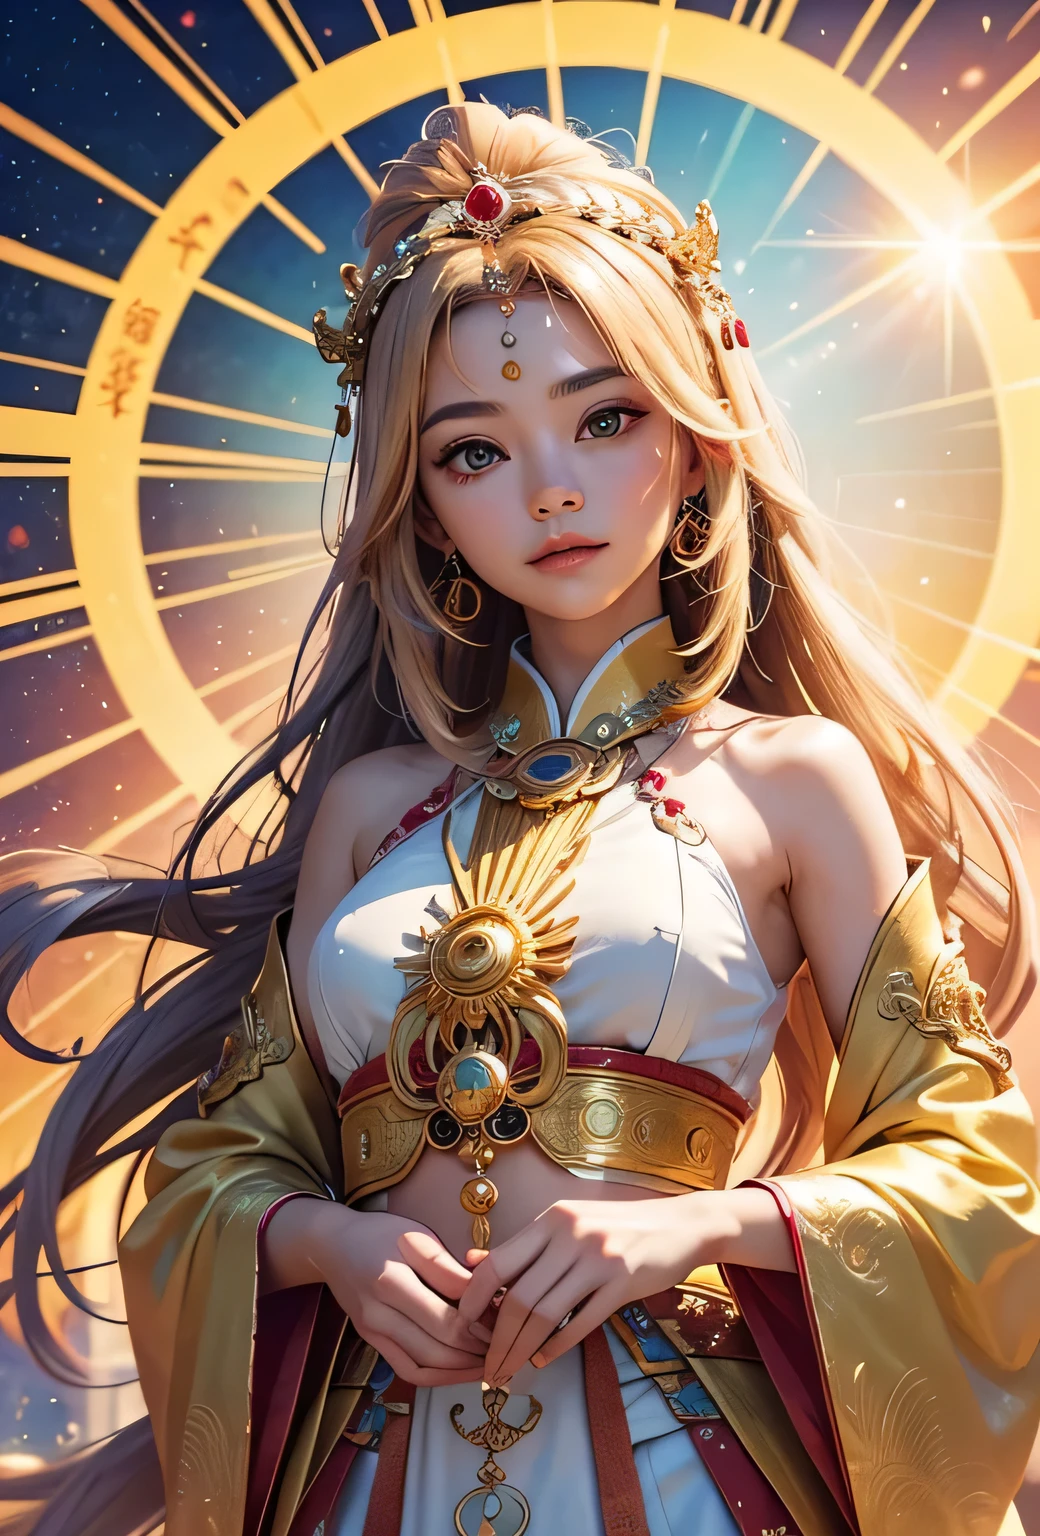 "Child of the Sun, Goddess of Love": Within a sacred sanctuary bathed in sunlight, depict the figure of a sun goddess who governs love, facing forward and emanating divine radiance. She is a , around 3 years old. Zoom in to focus on her face, with a gleaming orb of light in her hands, representing the life-giving power of the sun. Her hair is shimmering gold, and she is wearing a traditional miko outfit as seen in Japanese shrines. The background should be predominantly gold, evoking a sense of divine splendor, with numerous heart-themed objects expressing the beauty of love. The setting is in heaven, enveloped in soft, bright light, where one can find tranquility and peace of mind, free from any trace of anxiety.Straight-on.